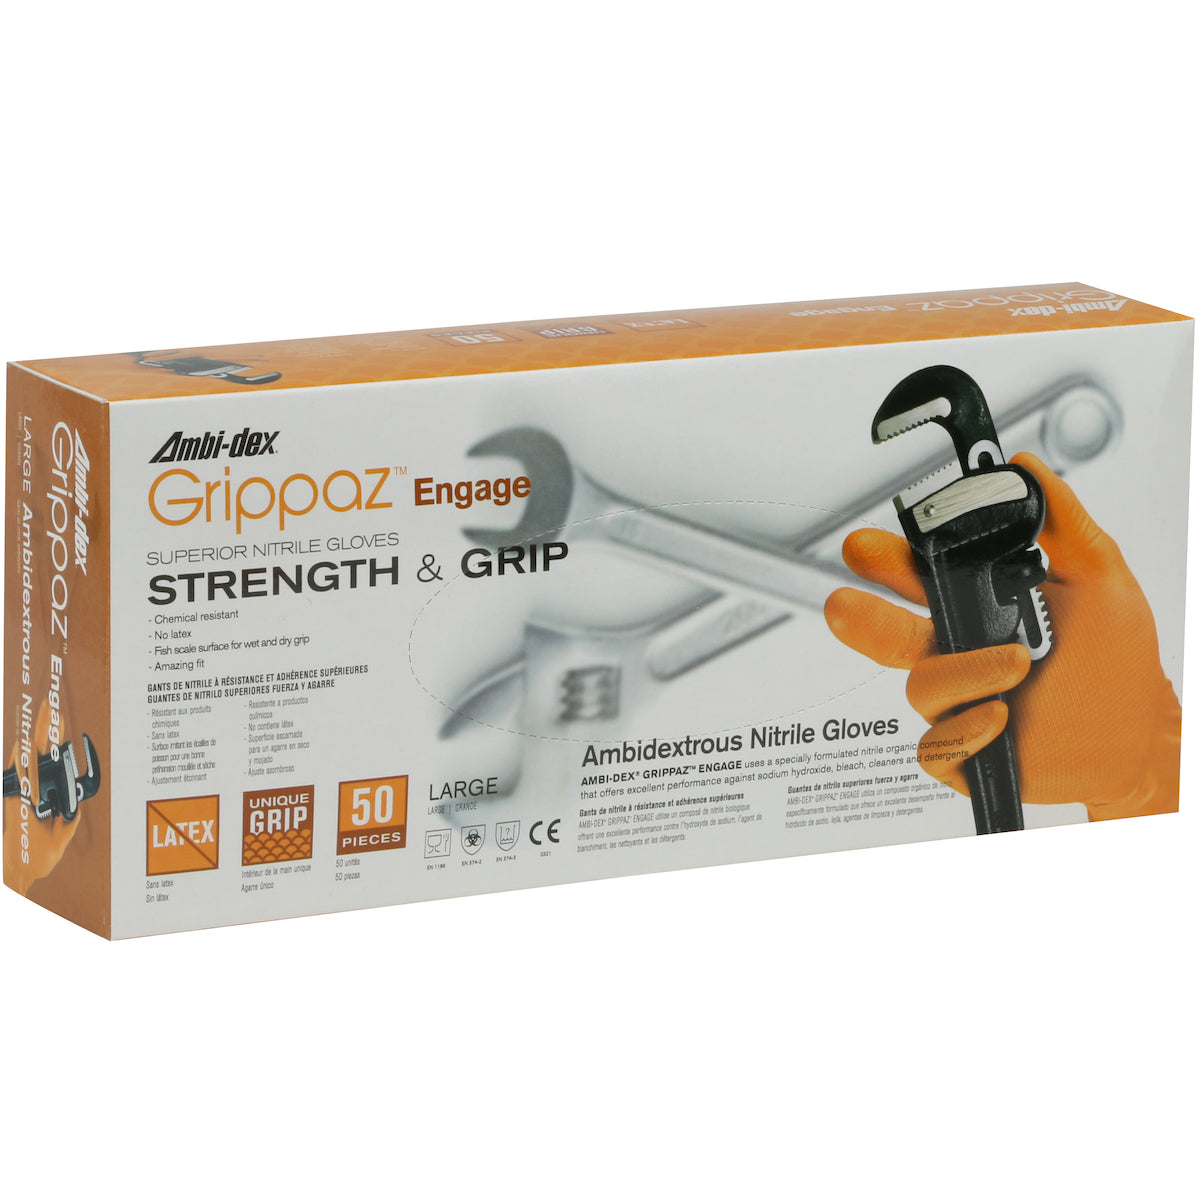 Grippaz 67-307/2XL Extended Use Ambidextrous Nitrile Glove with Textured Fish Scale Grip - 7 Mil